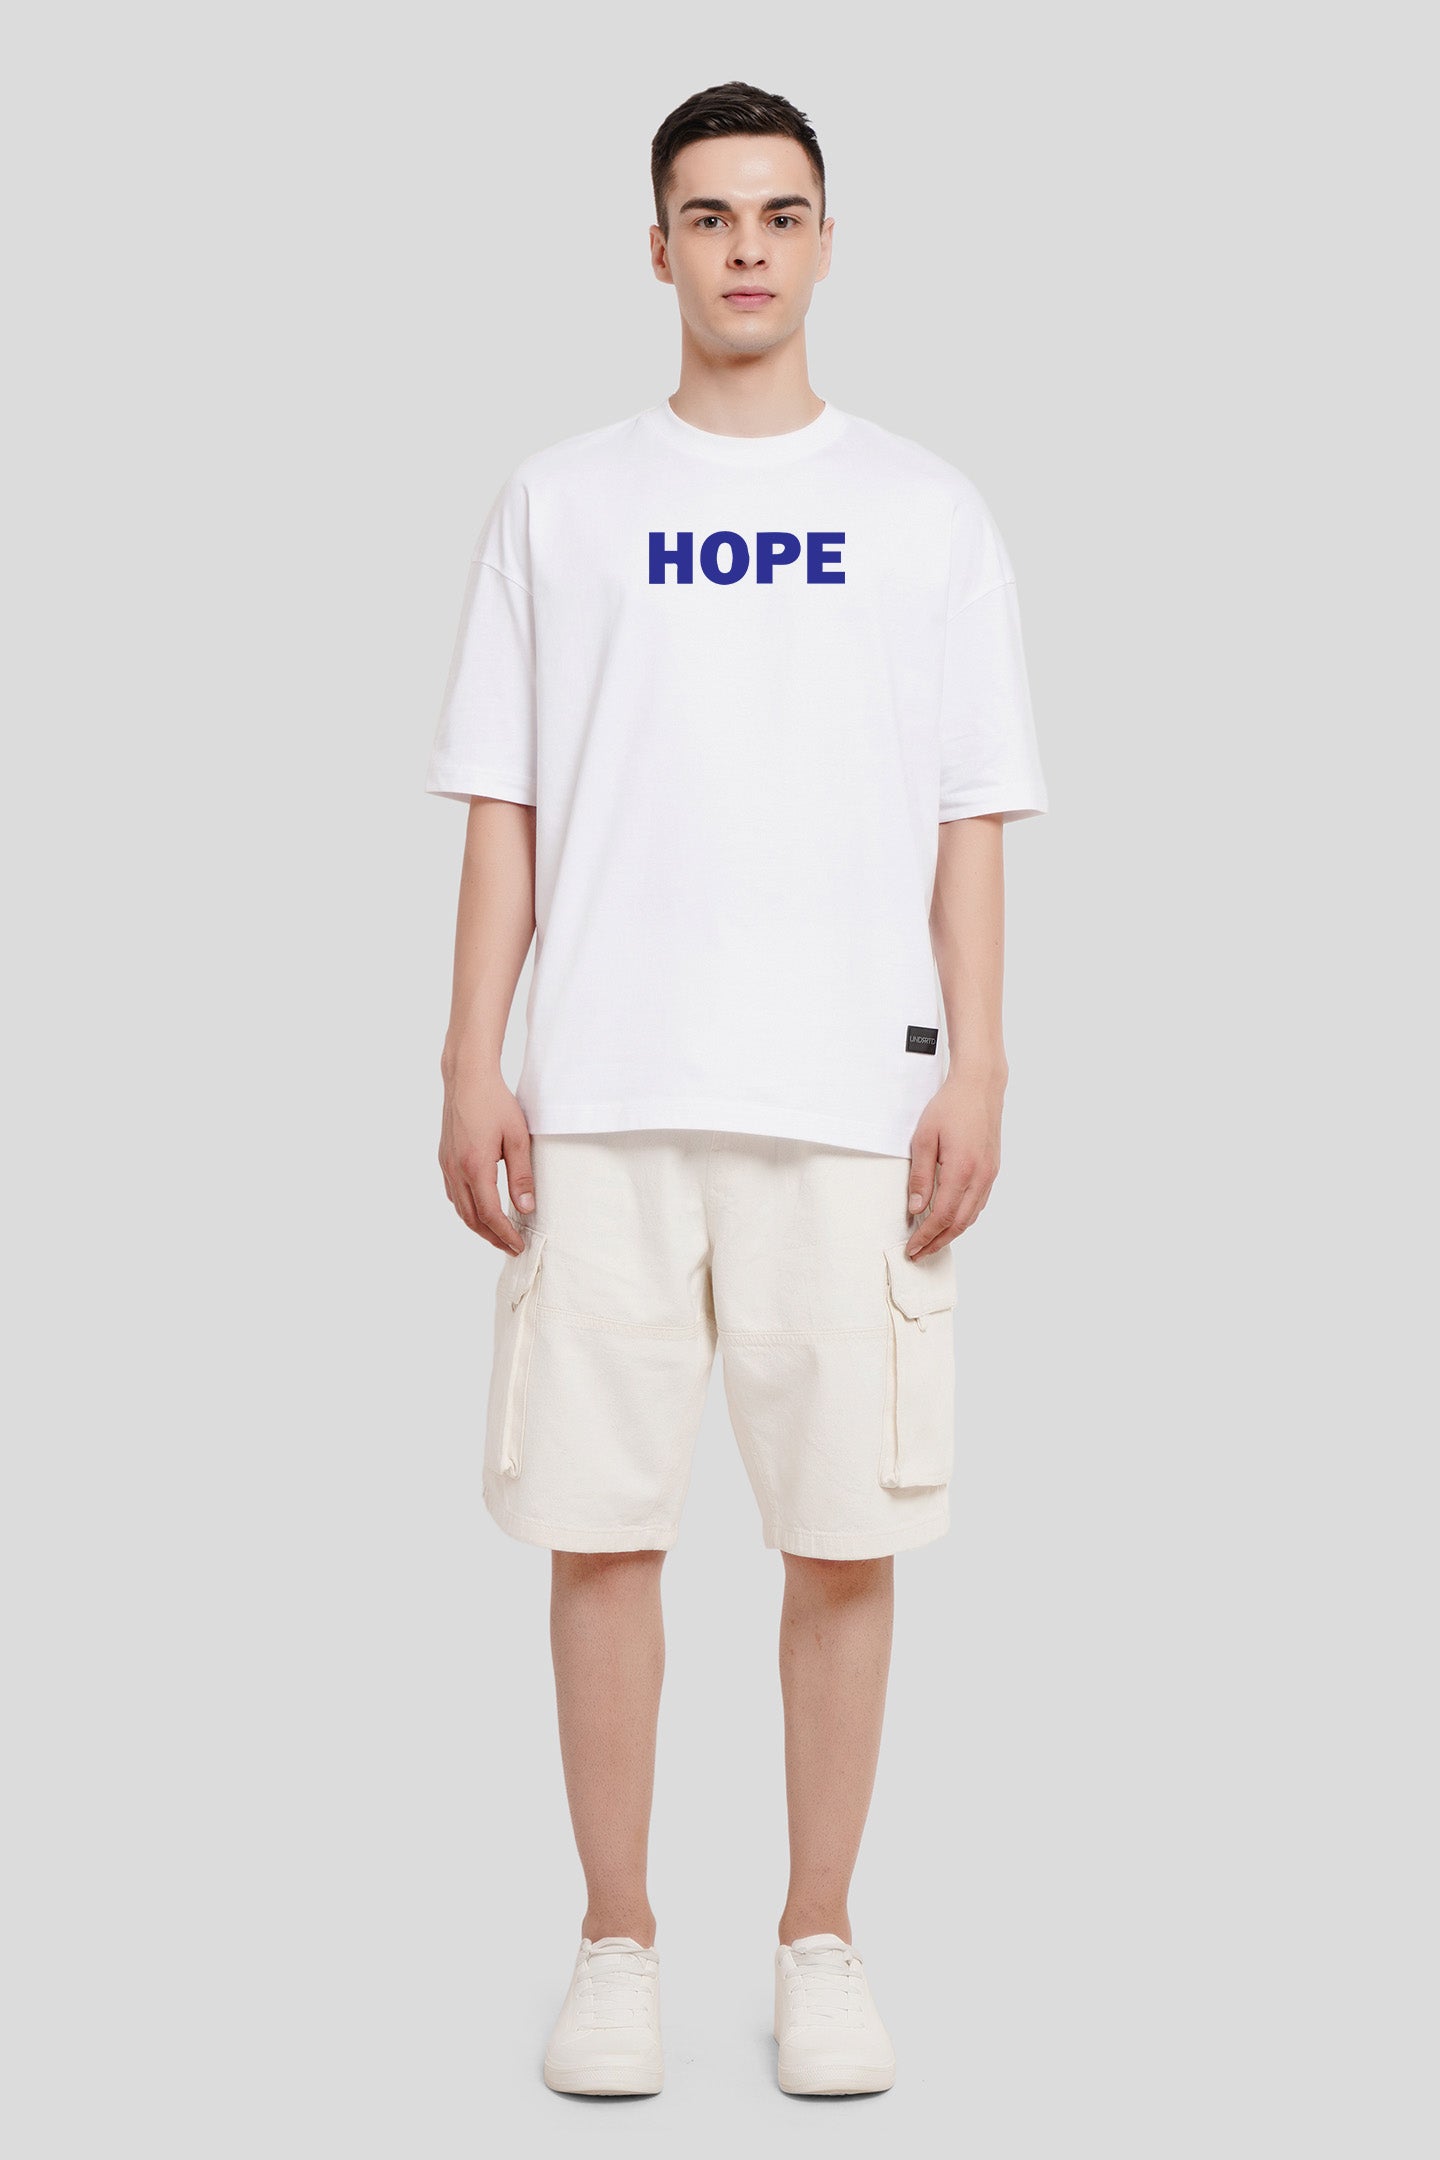 Hope White Printed T Shirt Men Baggy Fit With Front And Back Design Pic 4